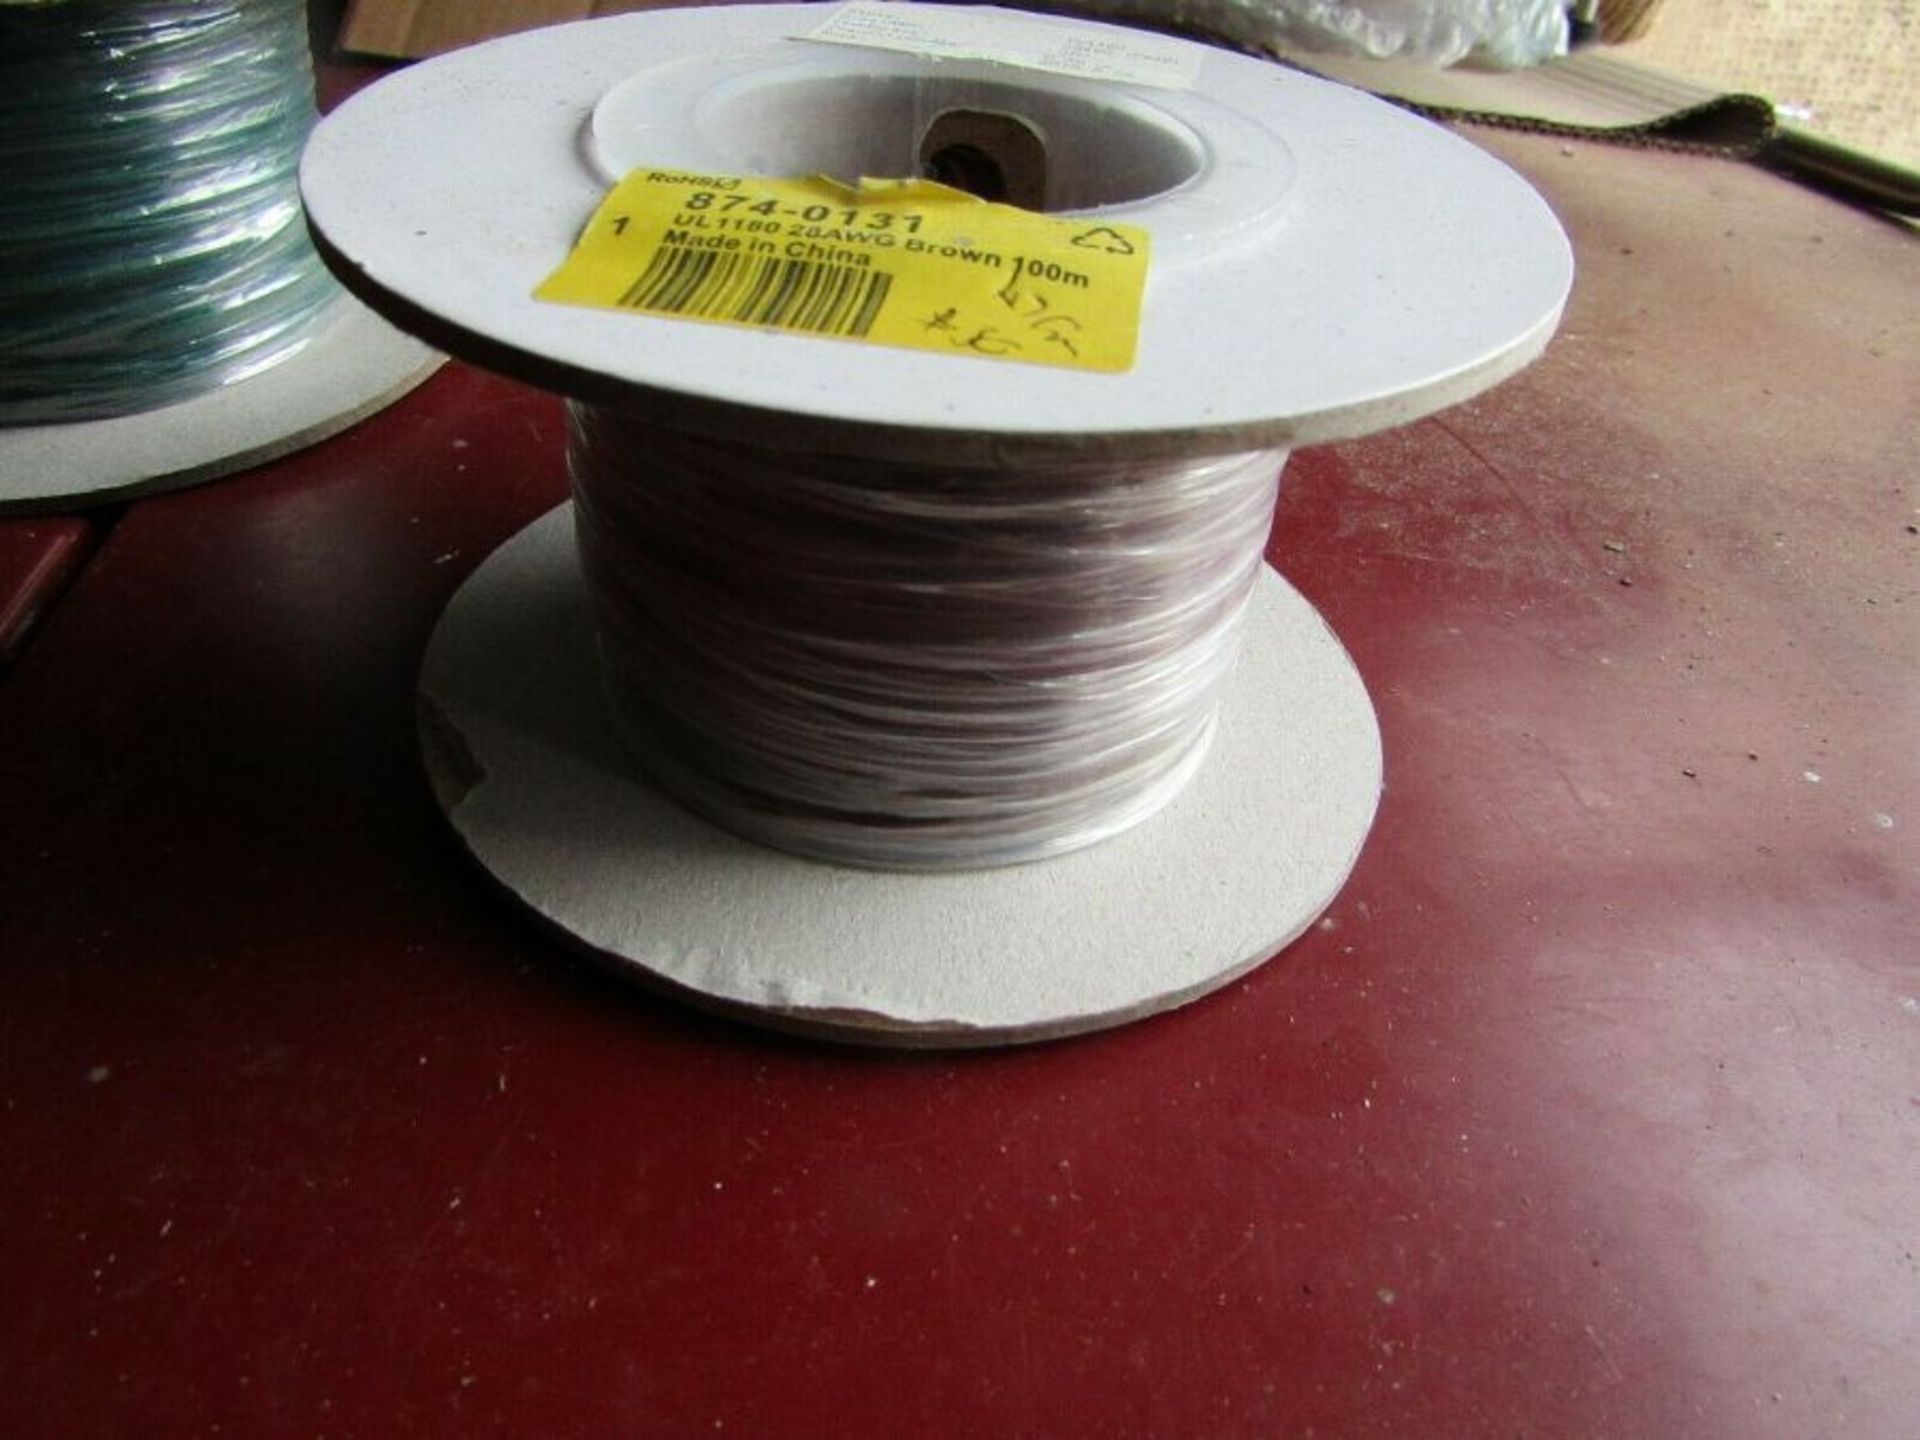 150 x 100m Reels of Assorted Cable / Hook Up Wire - 30 reels each of 5 different items - Image 2 of 3